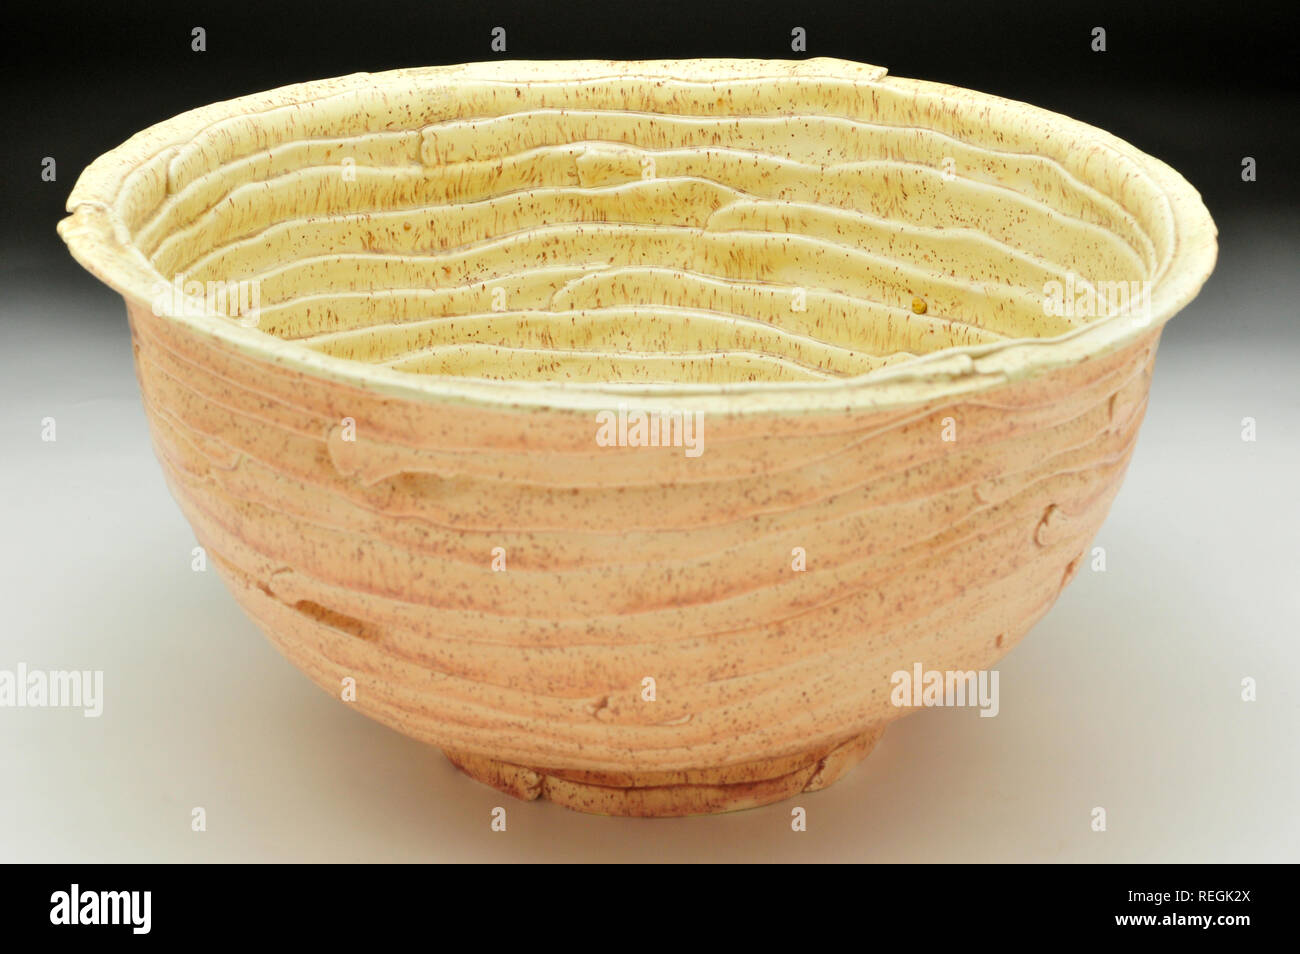 Peach and mellow yellow speckled ceramic glazed bowl Stock Photo